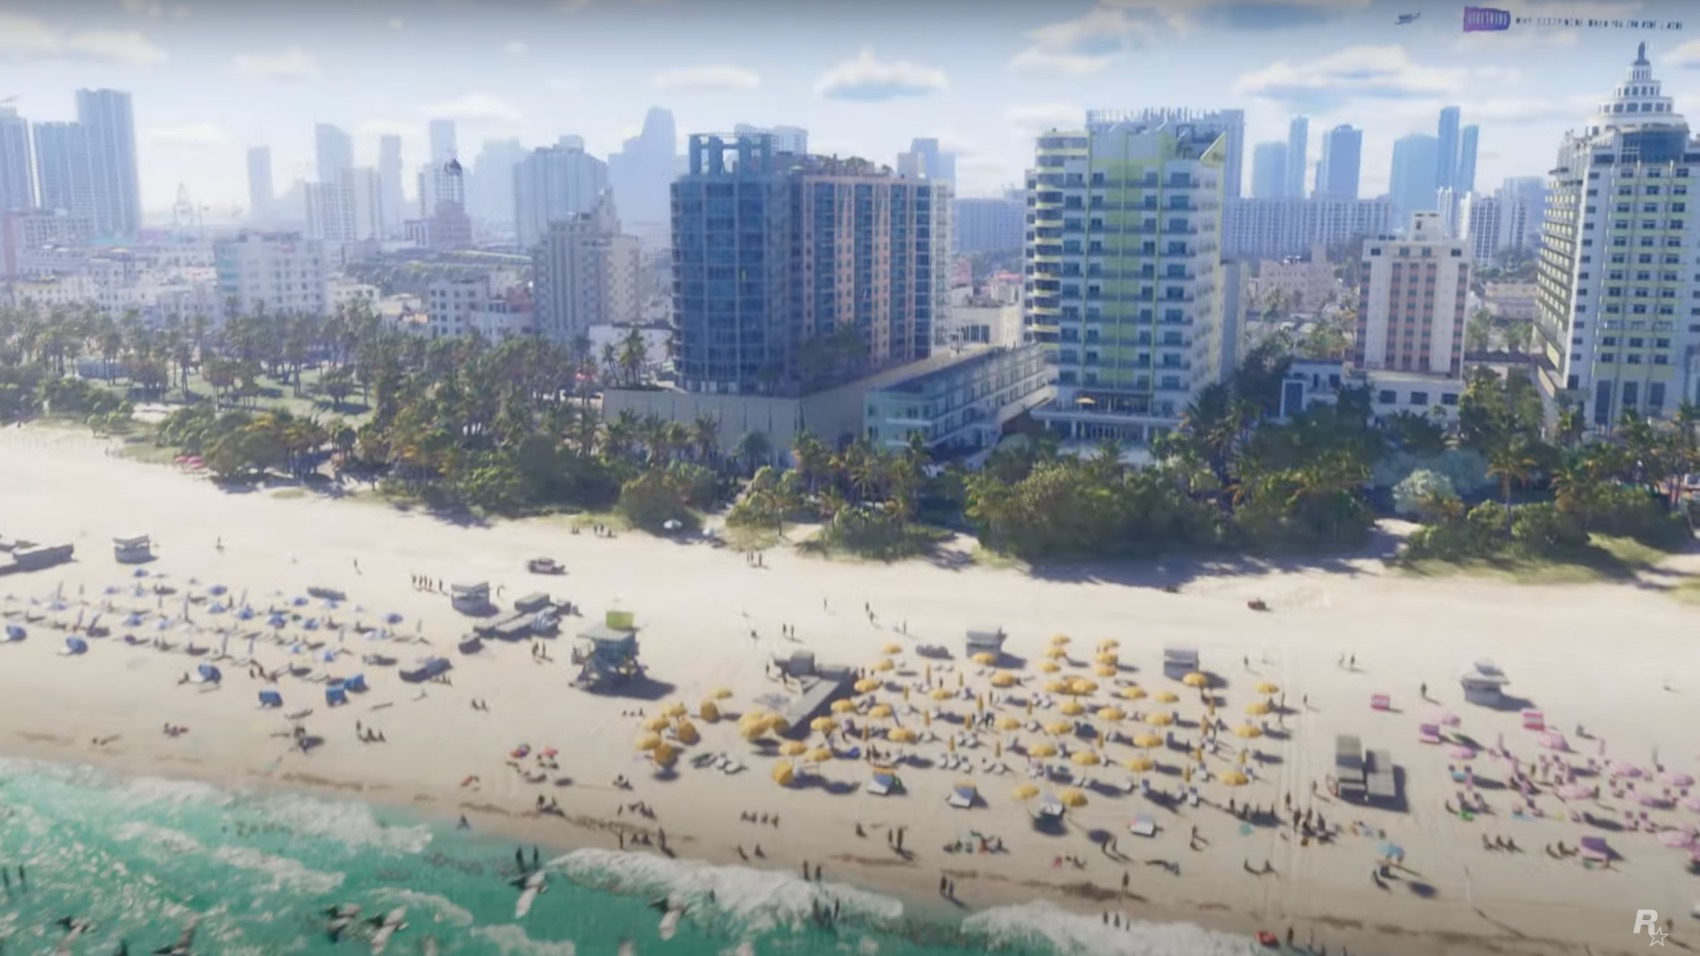 most Floridian moments in the GTA VI trailer